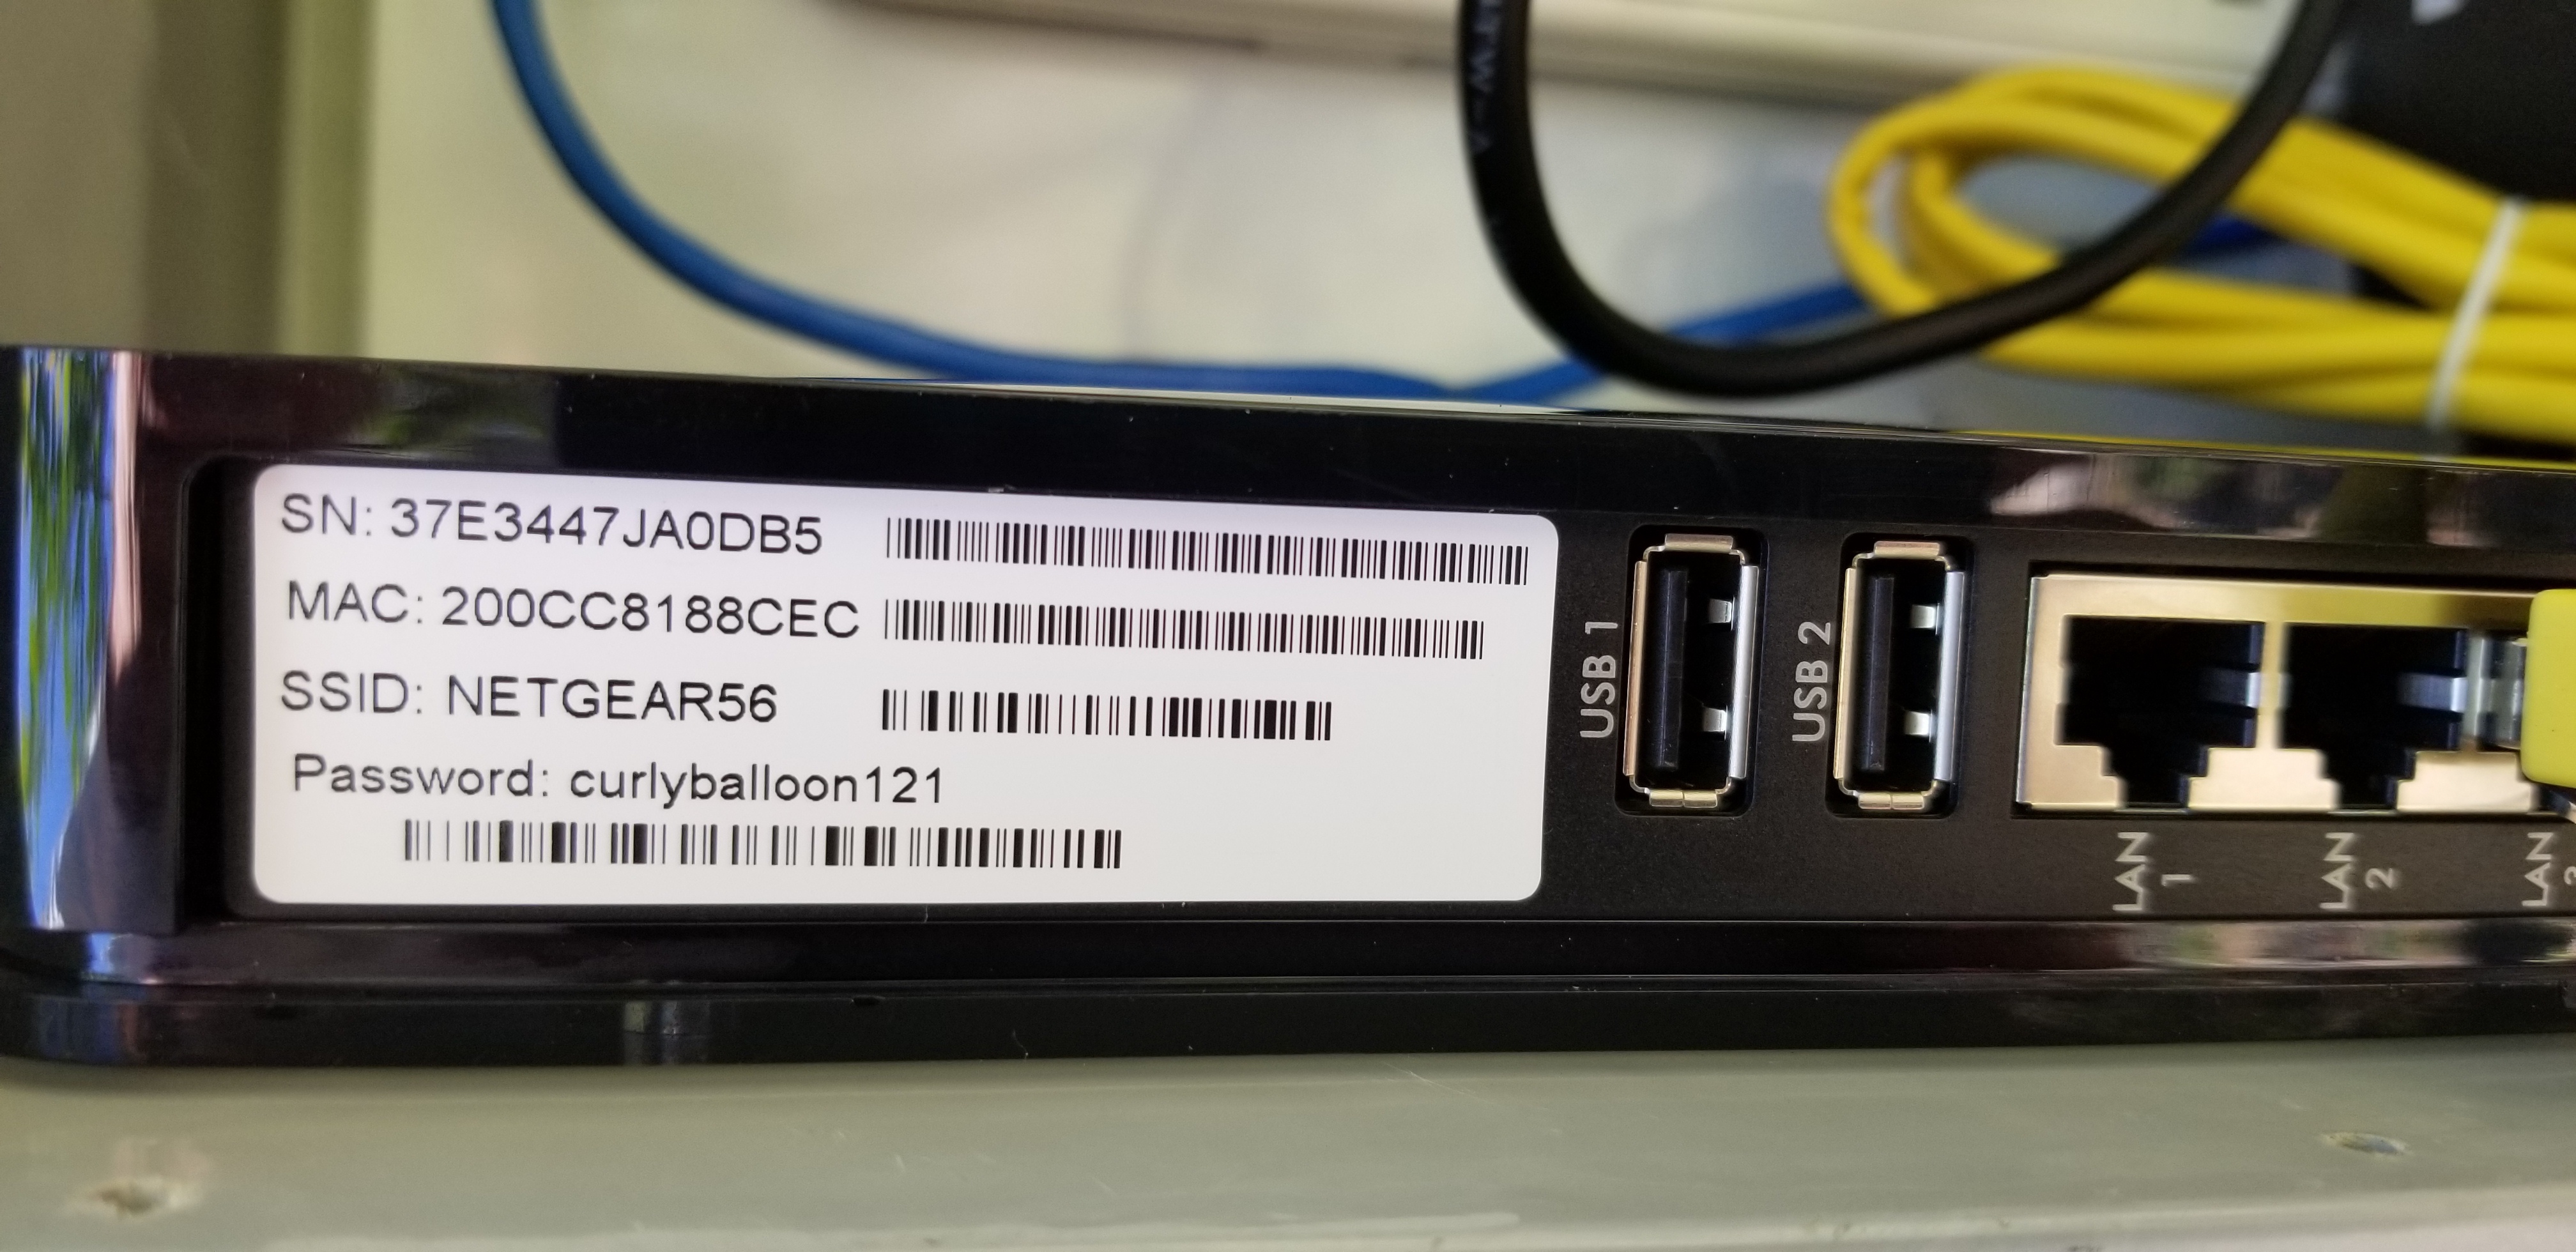 Solved: Identifying model number of a Wifi router - NETGEAR Communities